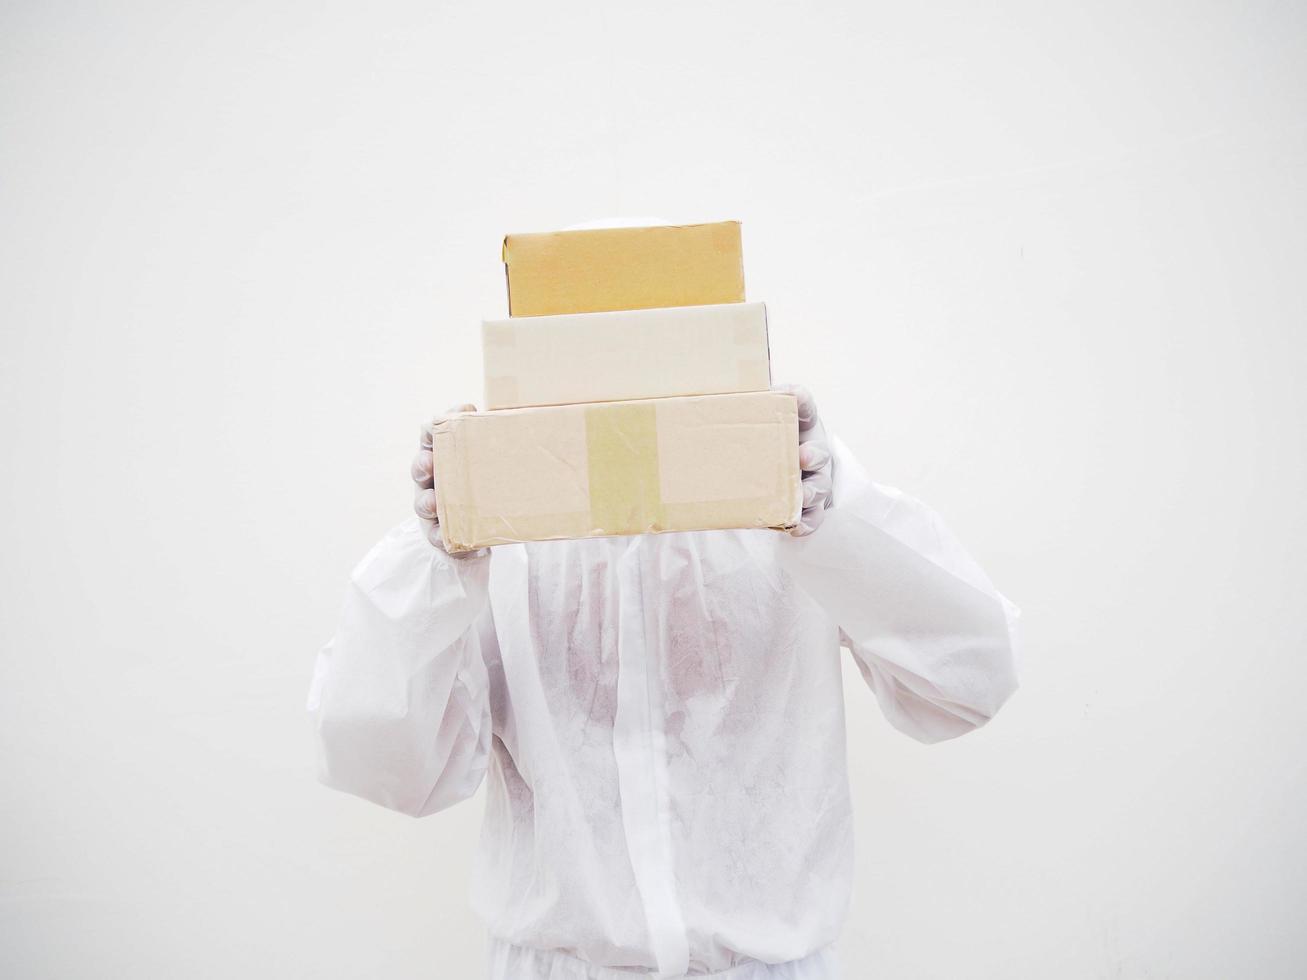 Young man in PPE suite uniform while holding cardboard boxes in medical rubber gloves and mask. coronavirus or COVID-19 concept isolated white background photo